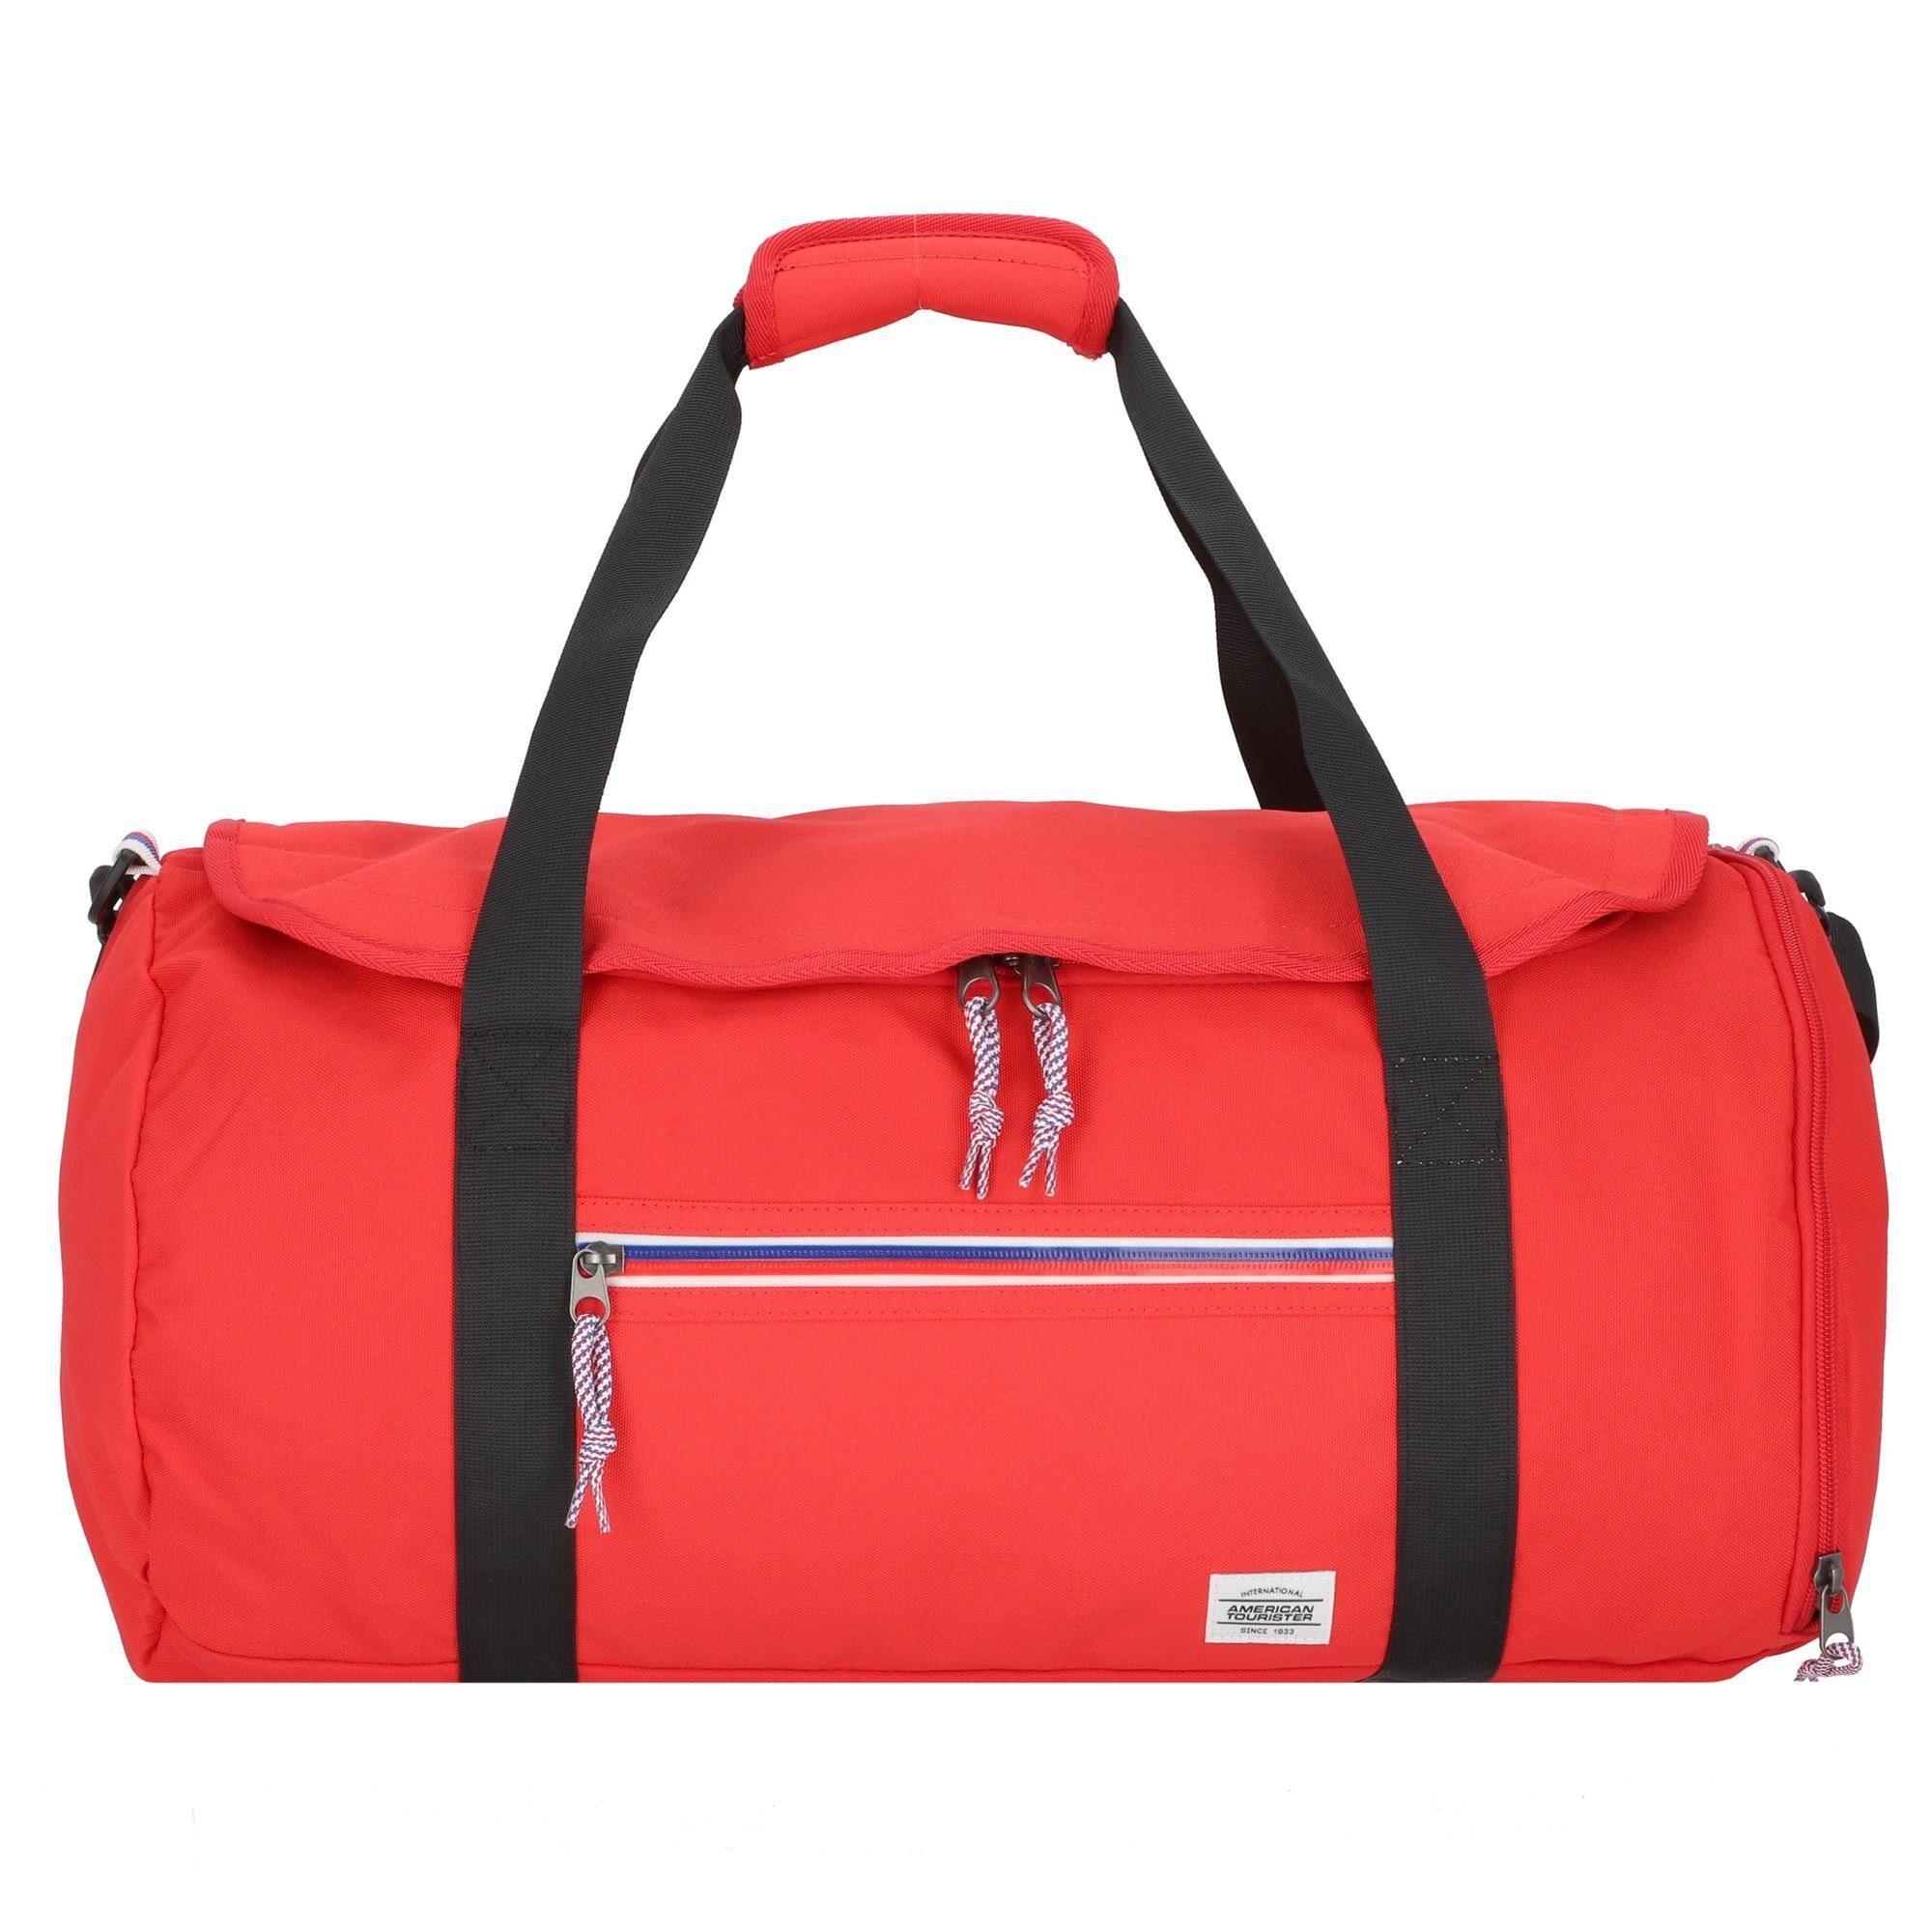 American Tourister® Sporttasche Upbeat, Polyester red